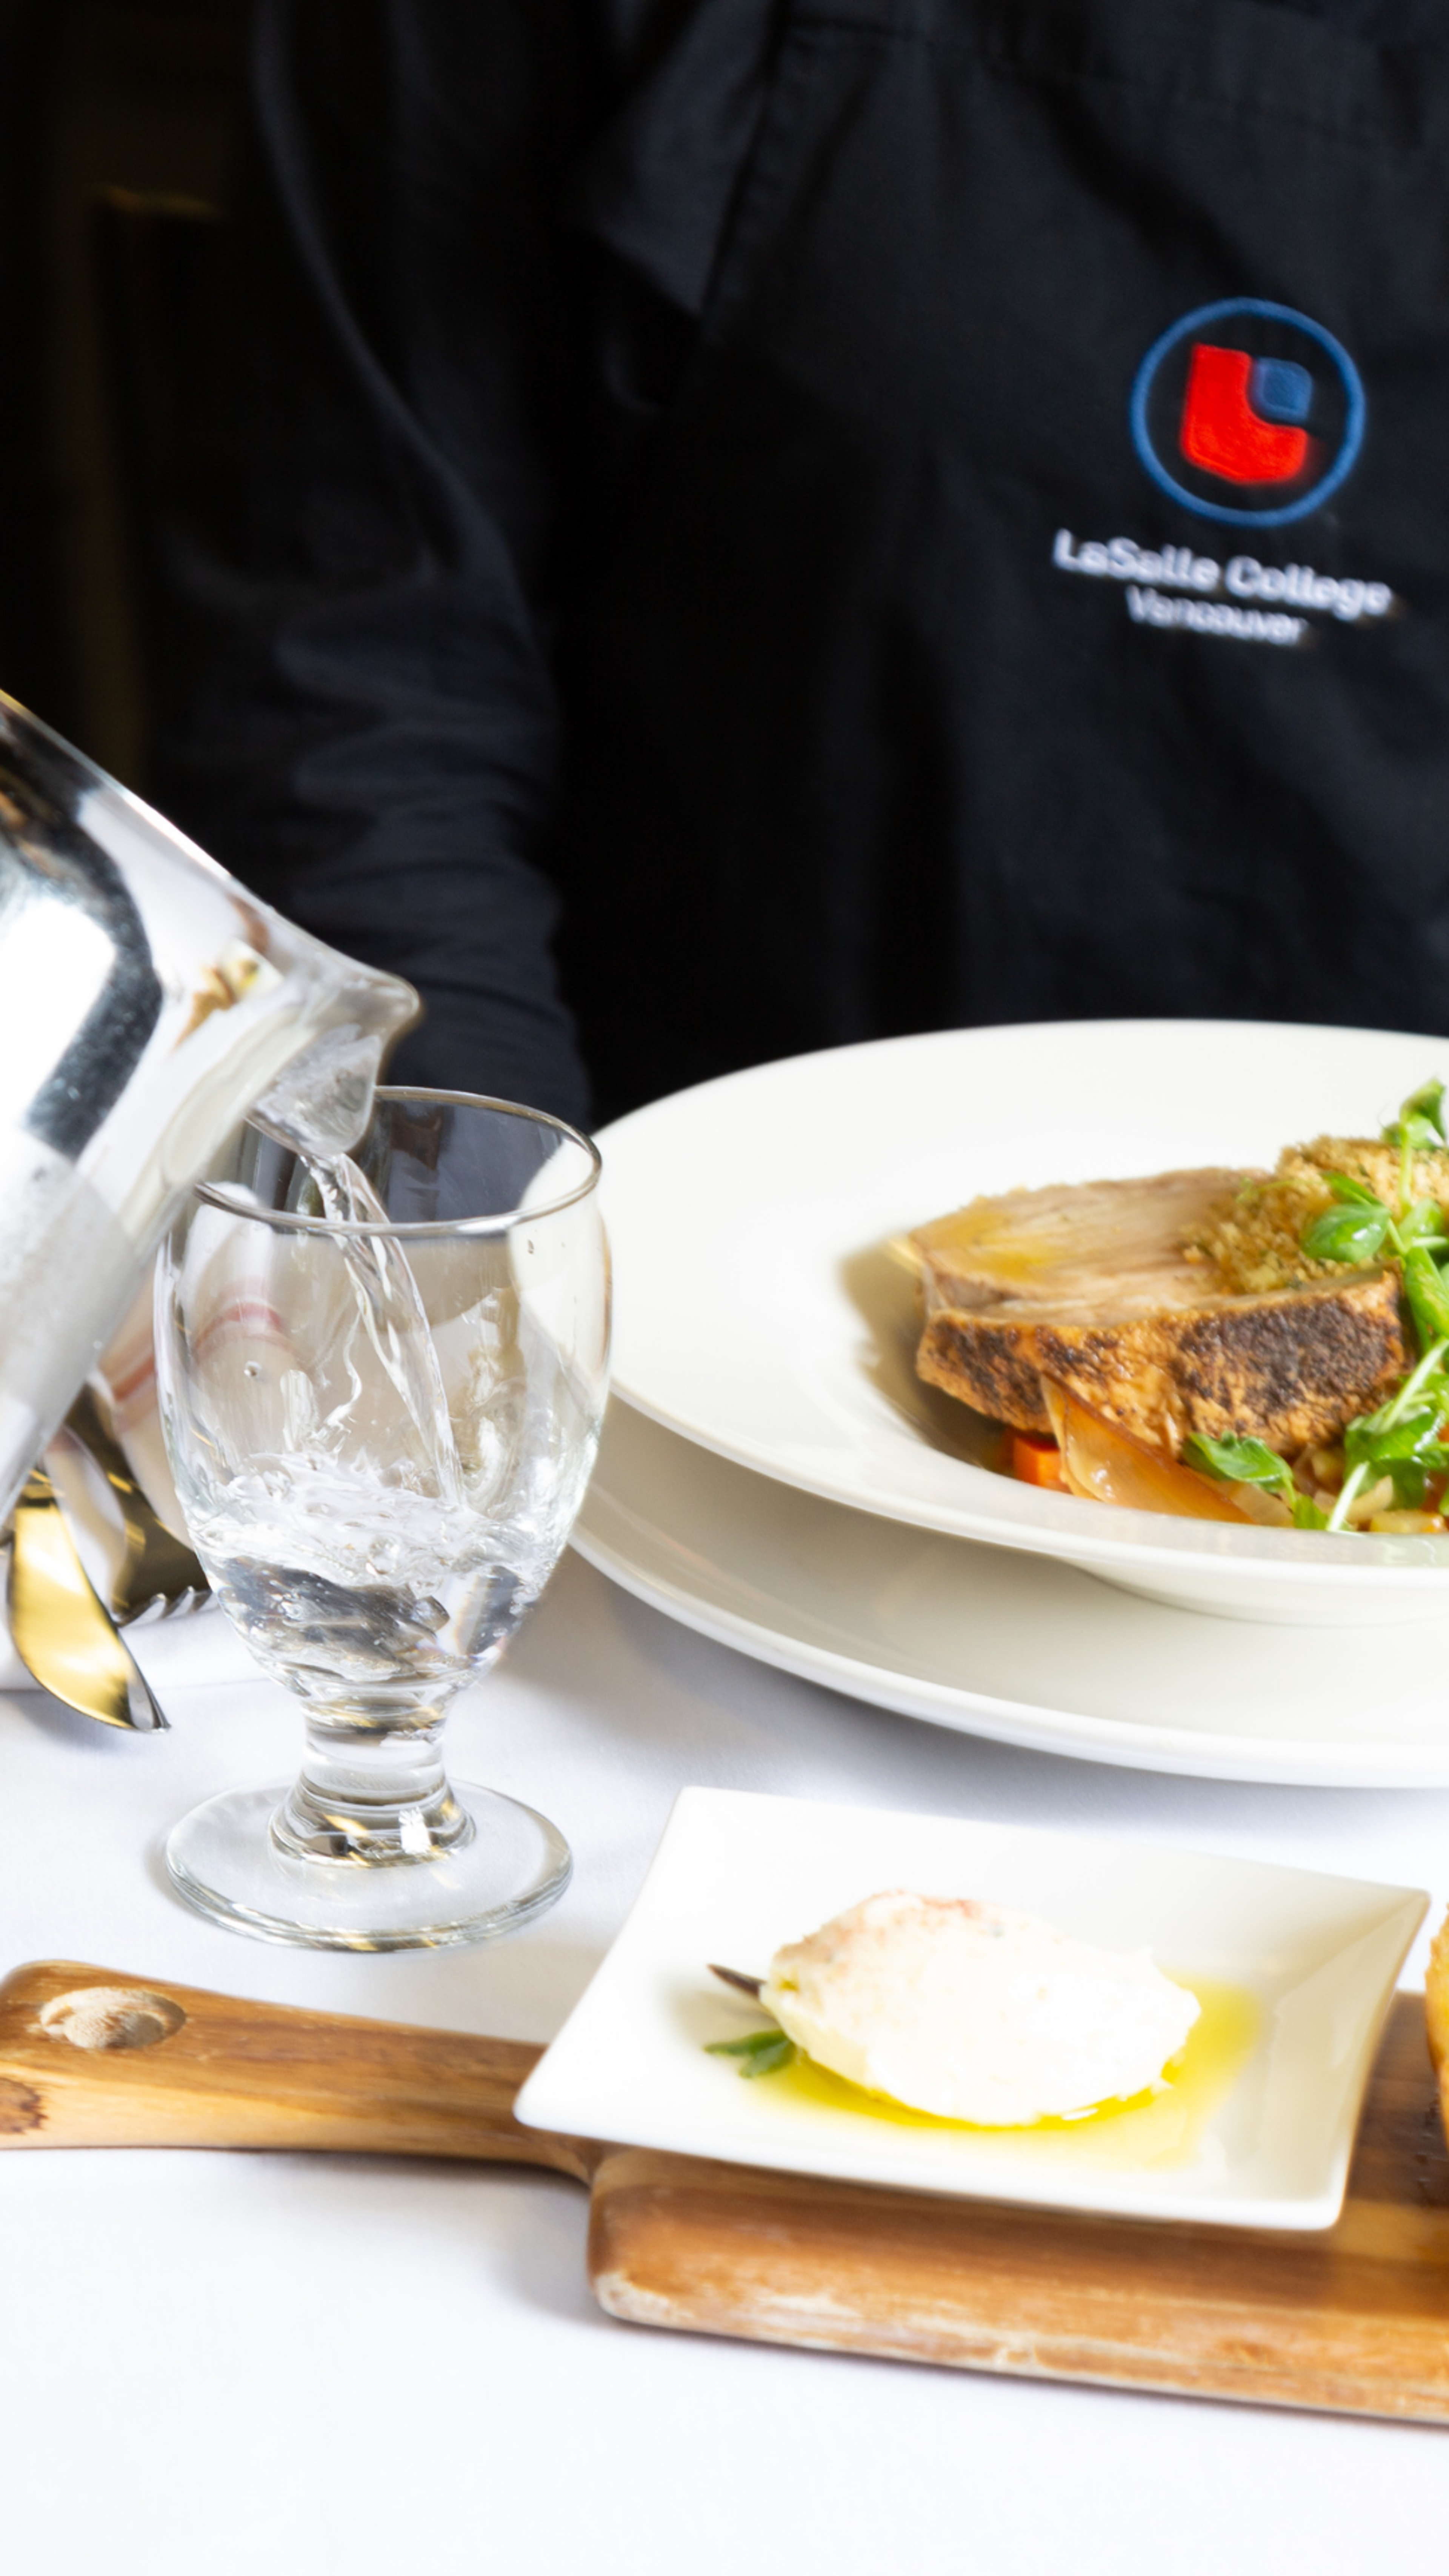 A server in a black apron, emblazoned with "LeSalle College Vancouver," pours water into a glass at a fine dining table featuring a dish of pan-seared fish and a side of creamy spread.